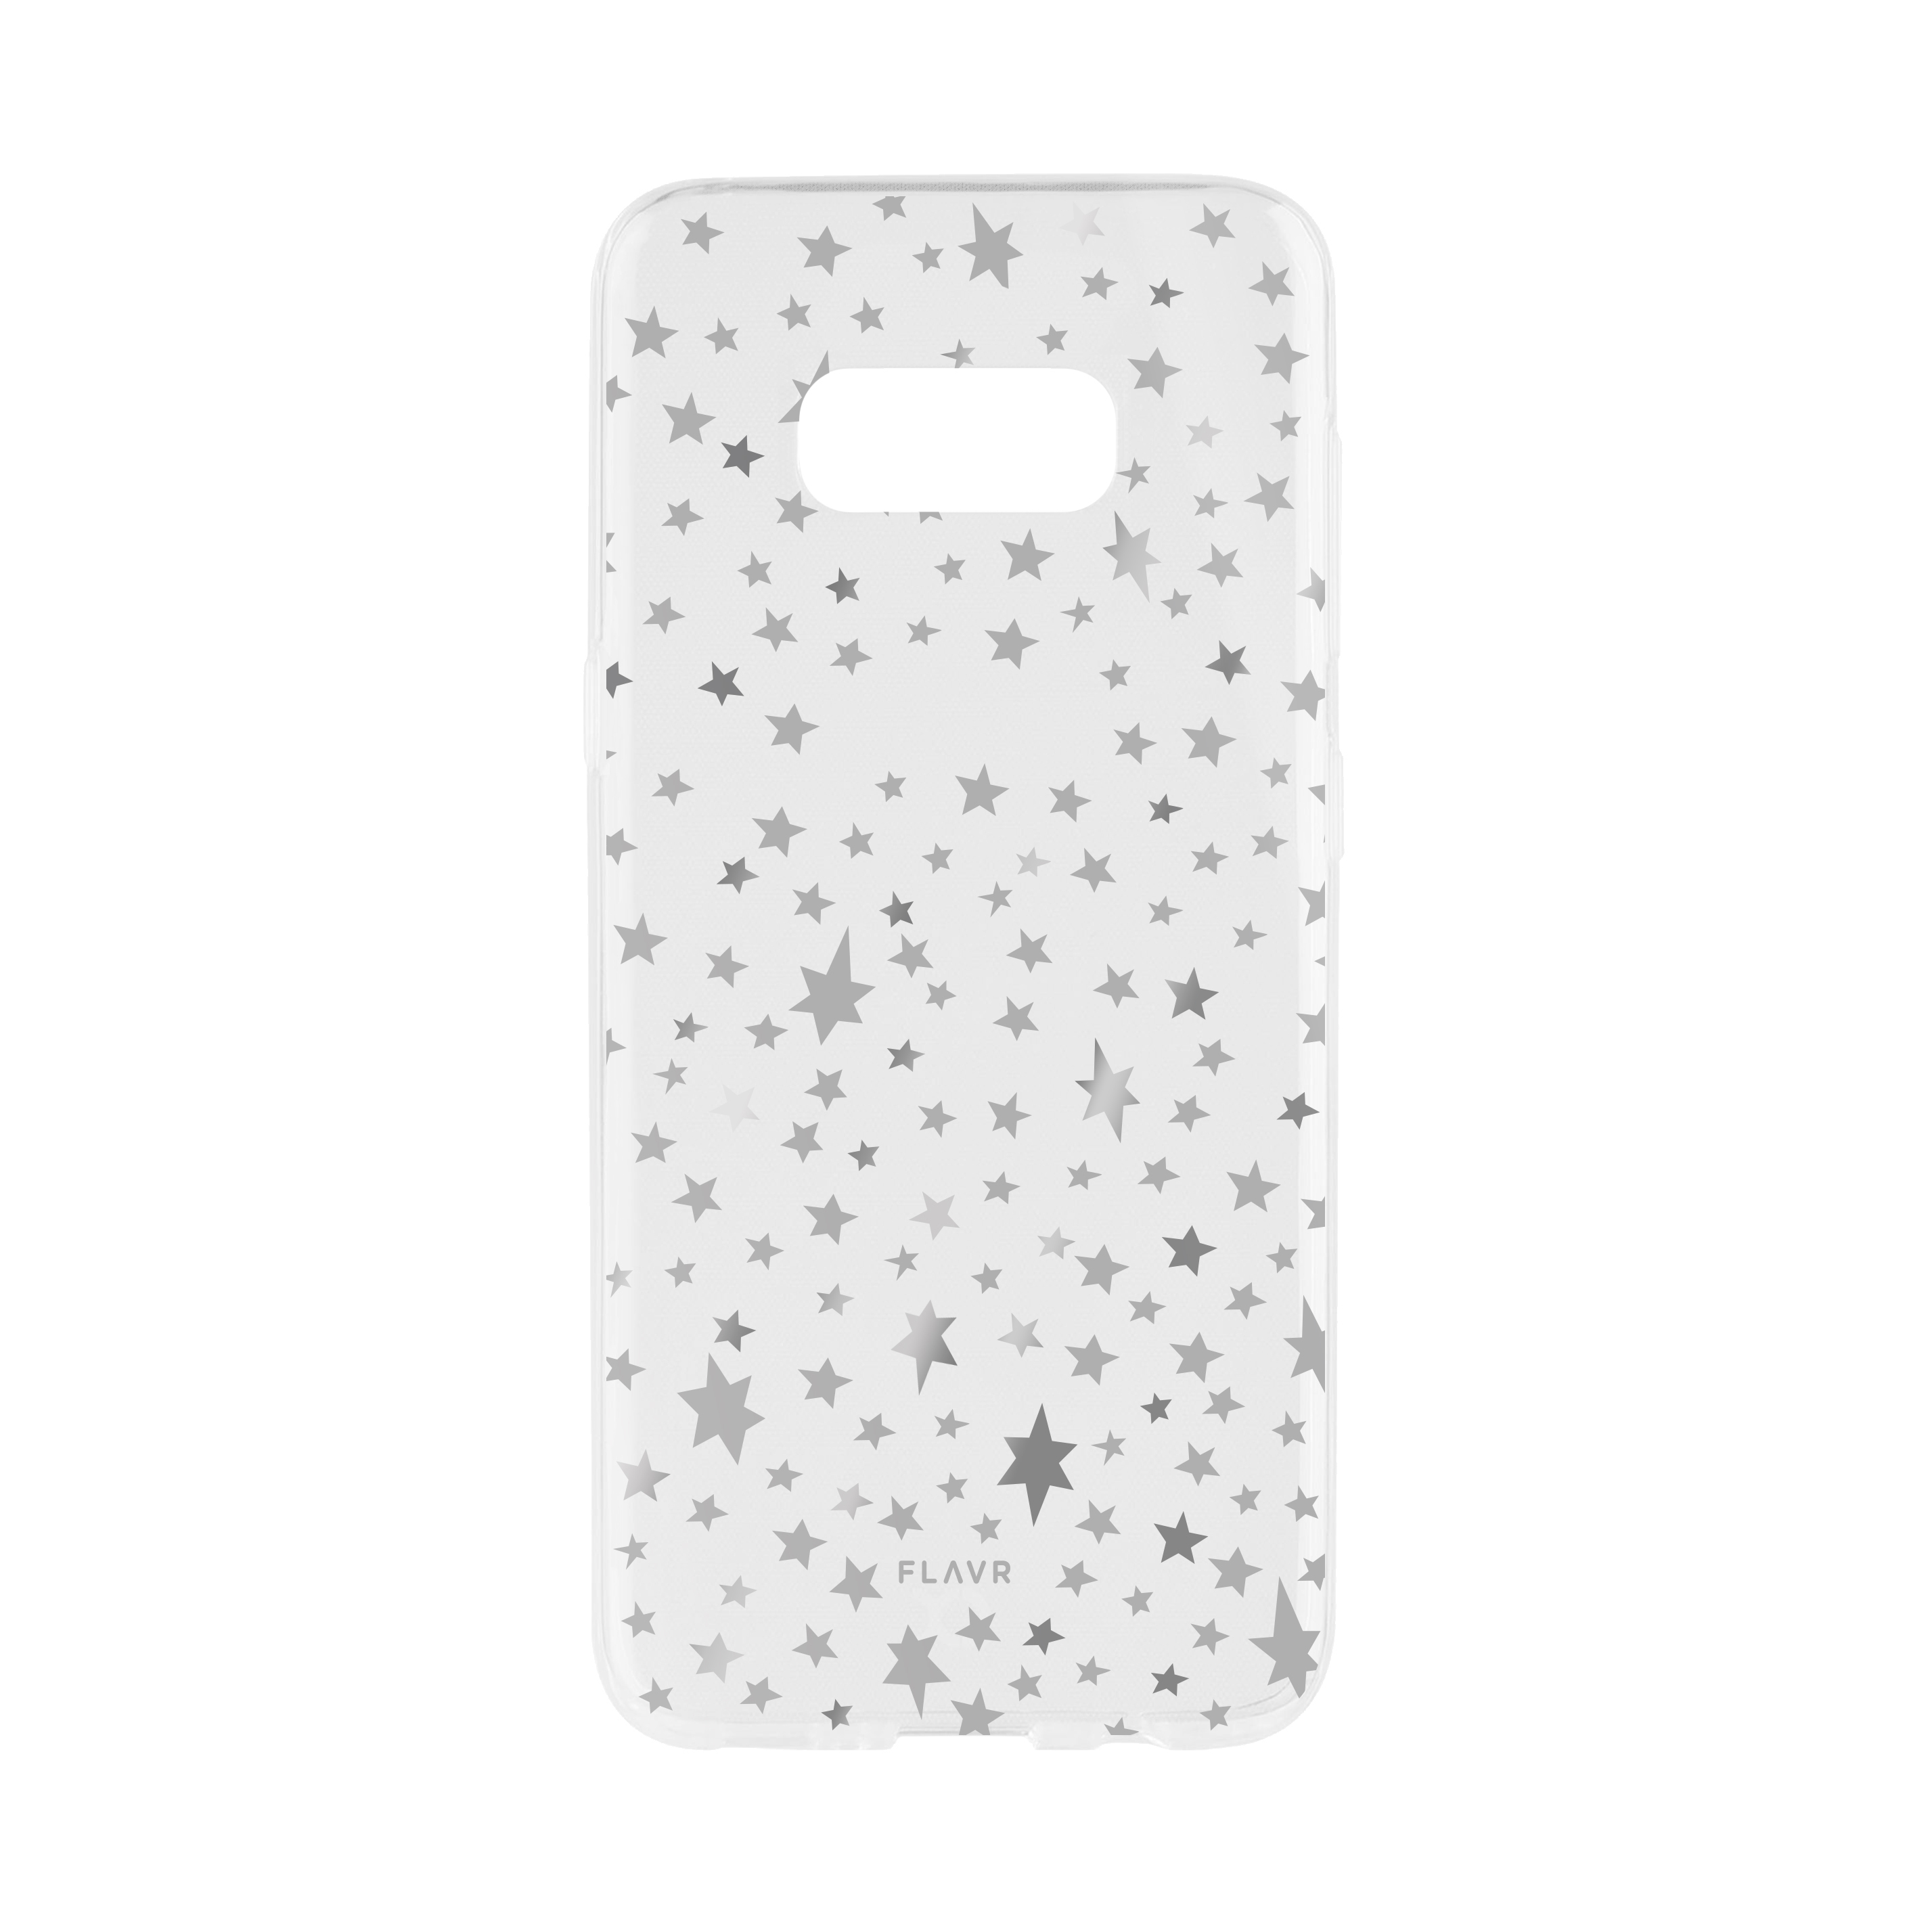 COLOURFUL SAMSUNG, 8, iPlate Backcover, GALAXY NOTE FLAVR Nights, Starry